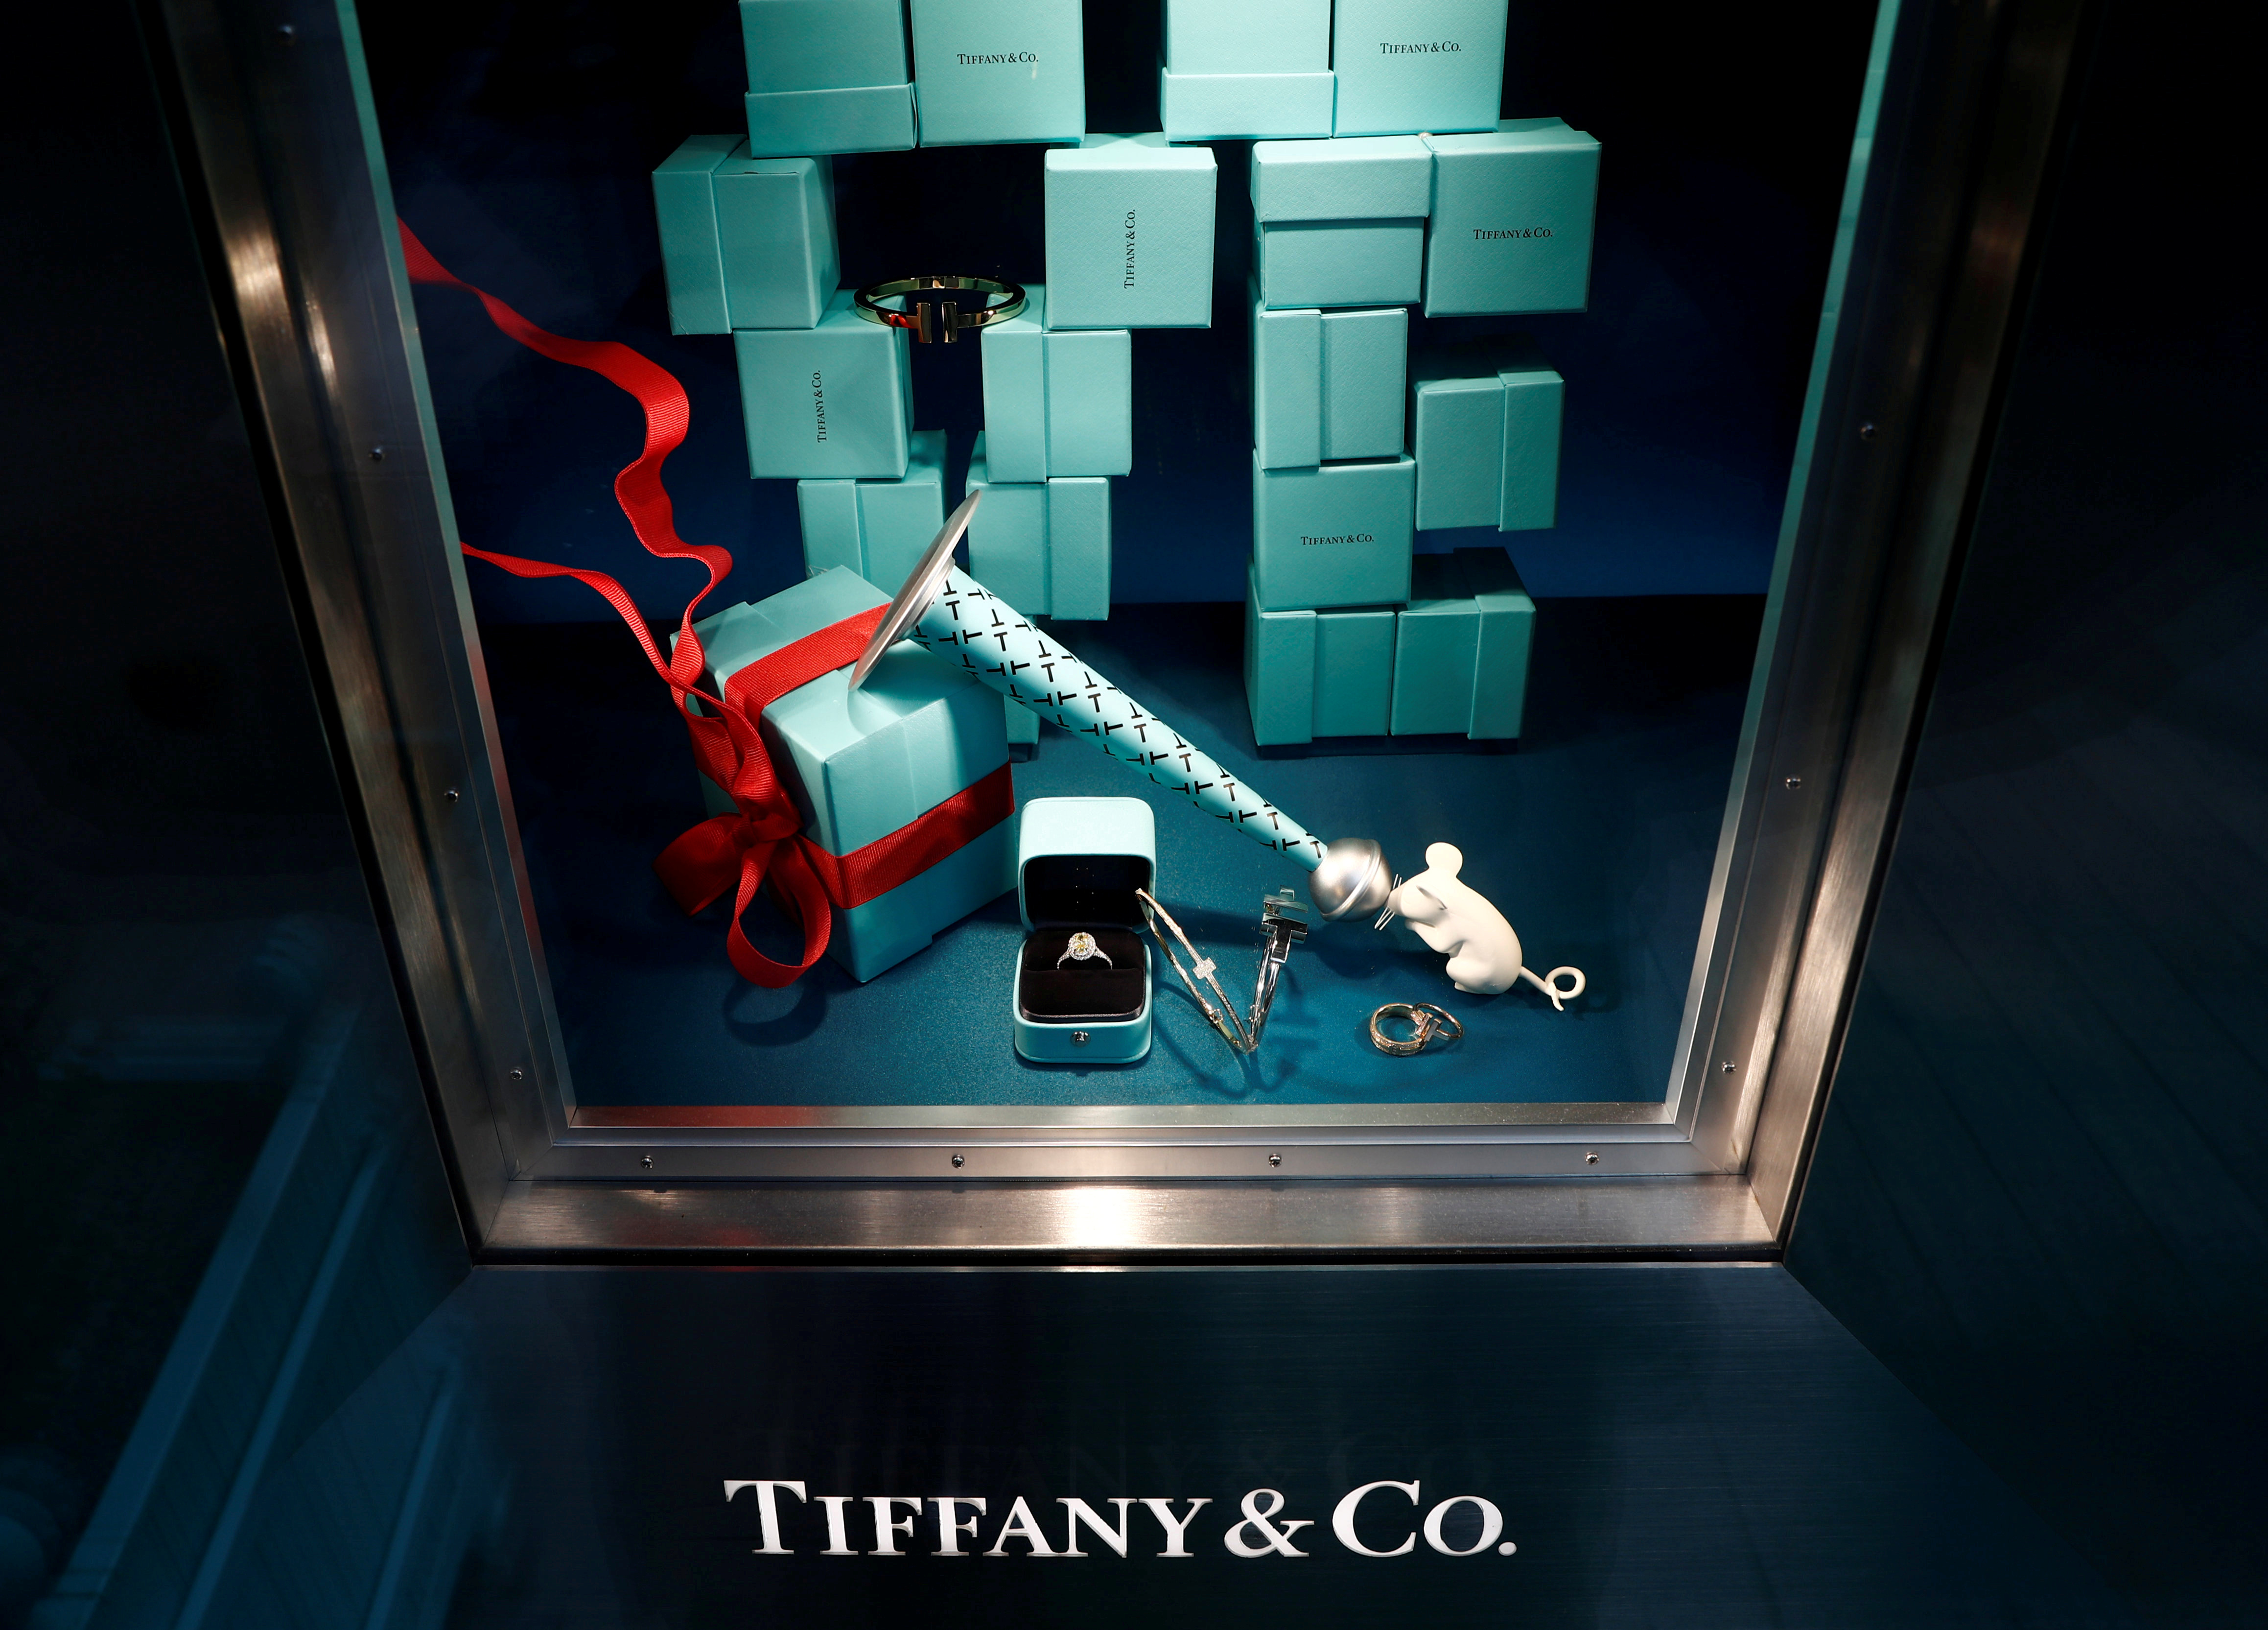 Tiffany & Co. jewelry is displayed in a store in Paris